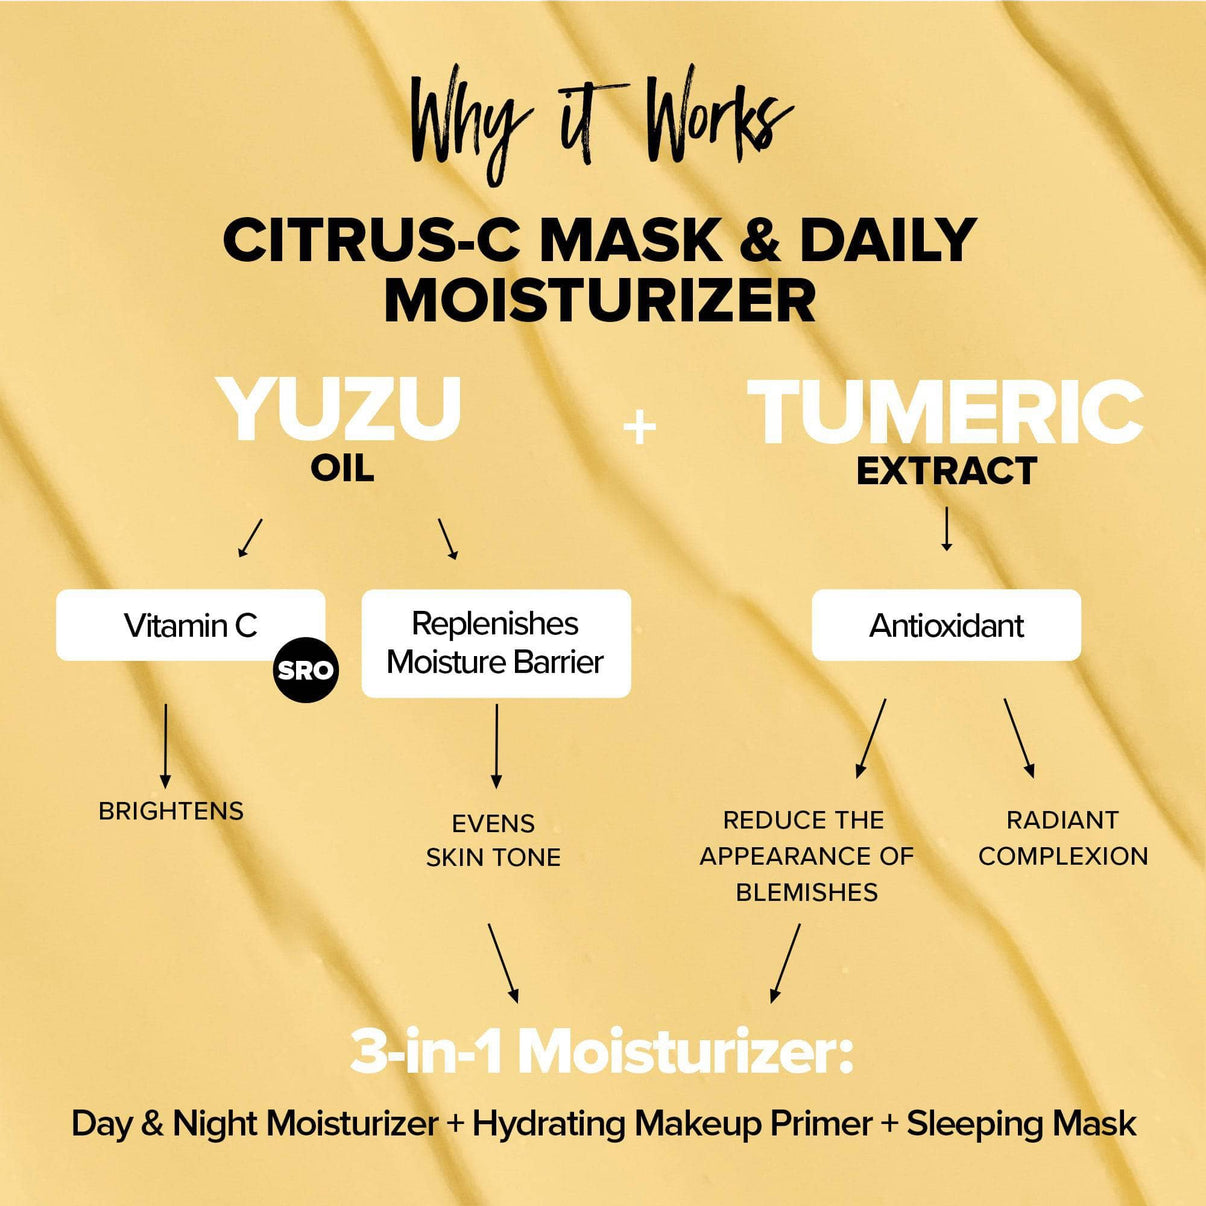 Why it works description of Citrus-c mask from Nude Basics Kit - 12